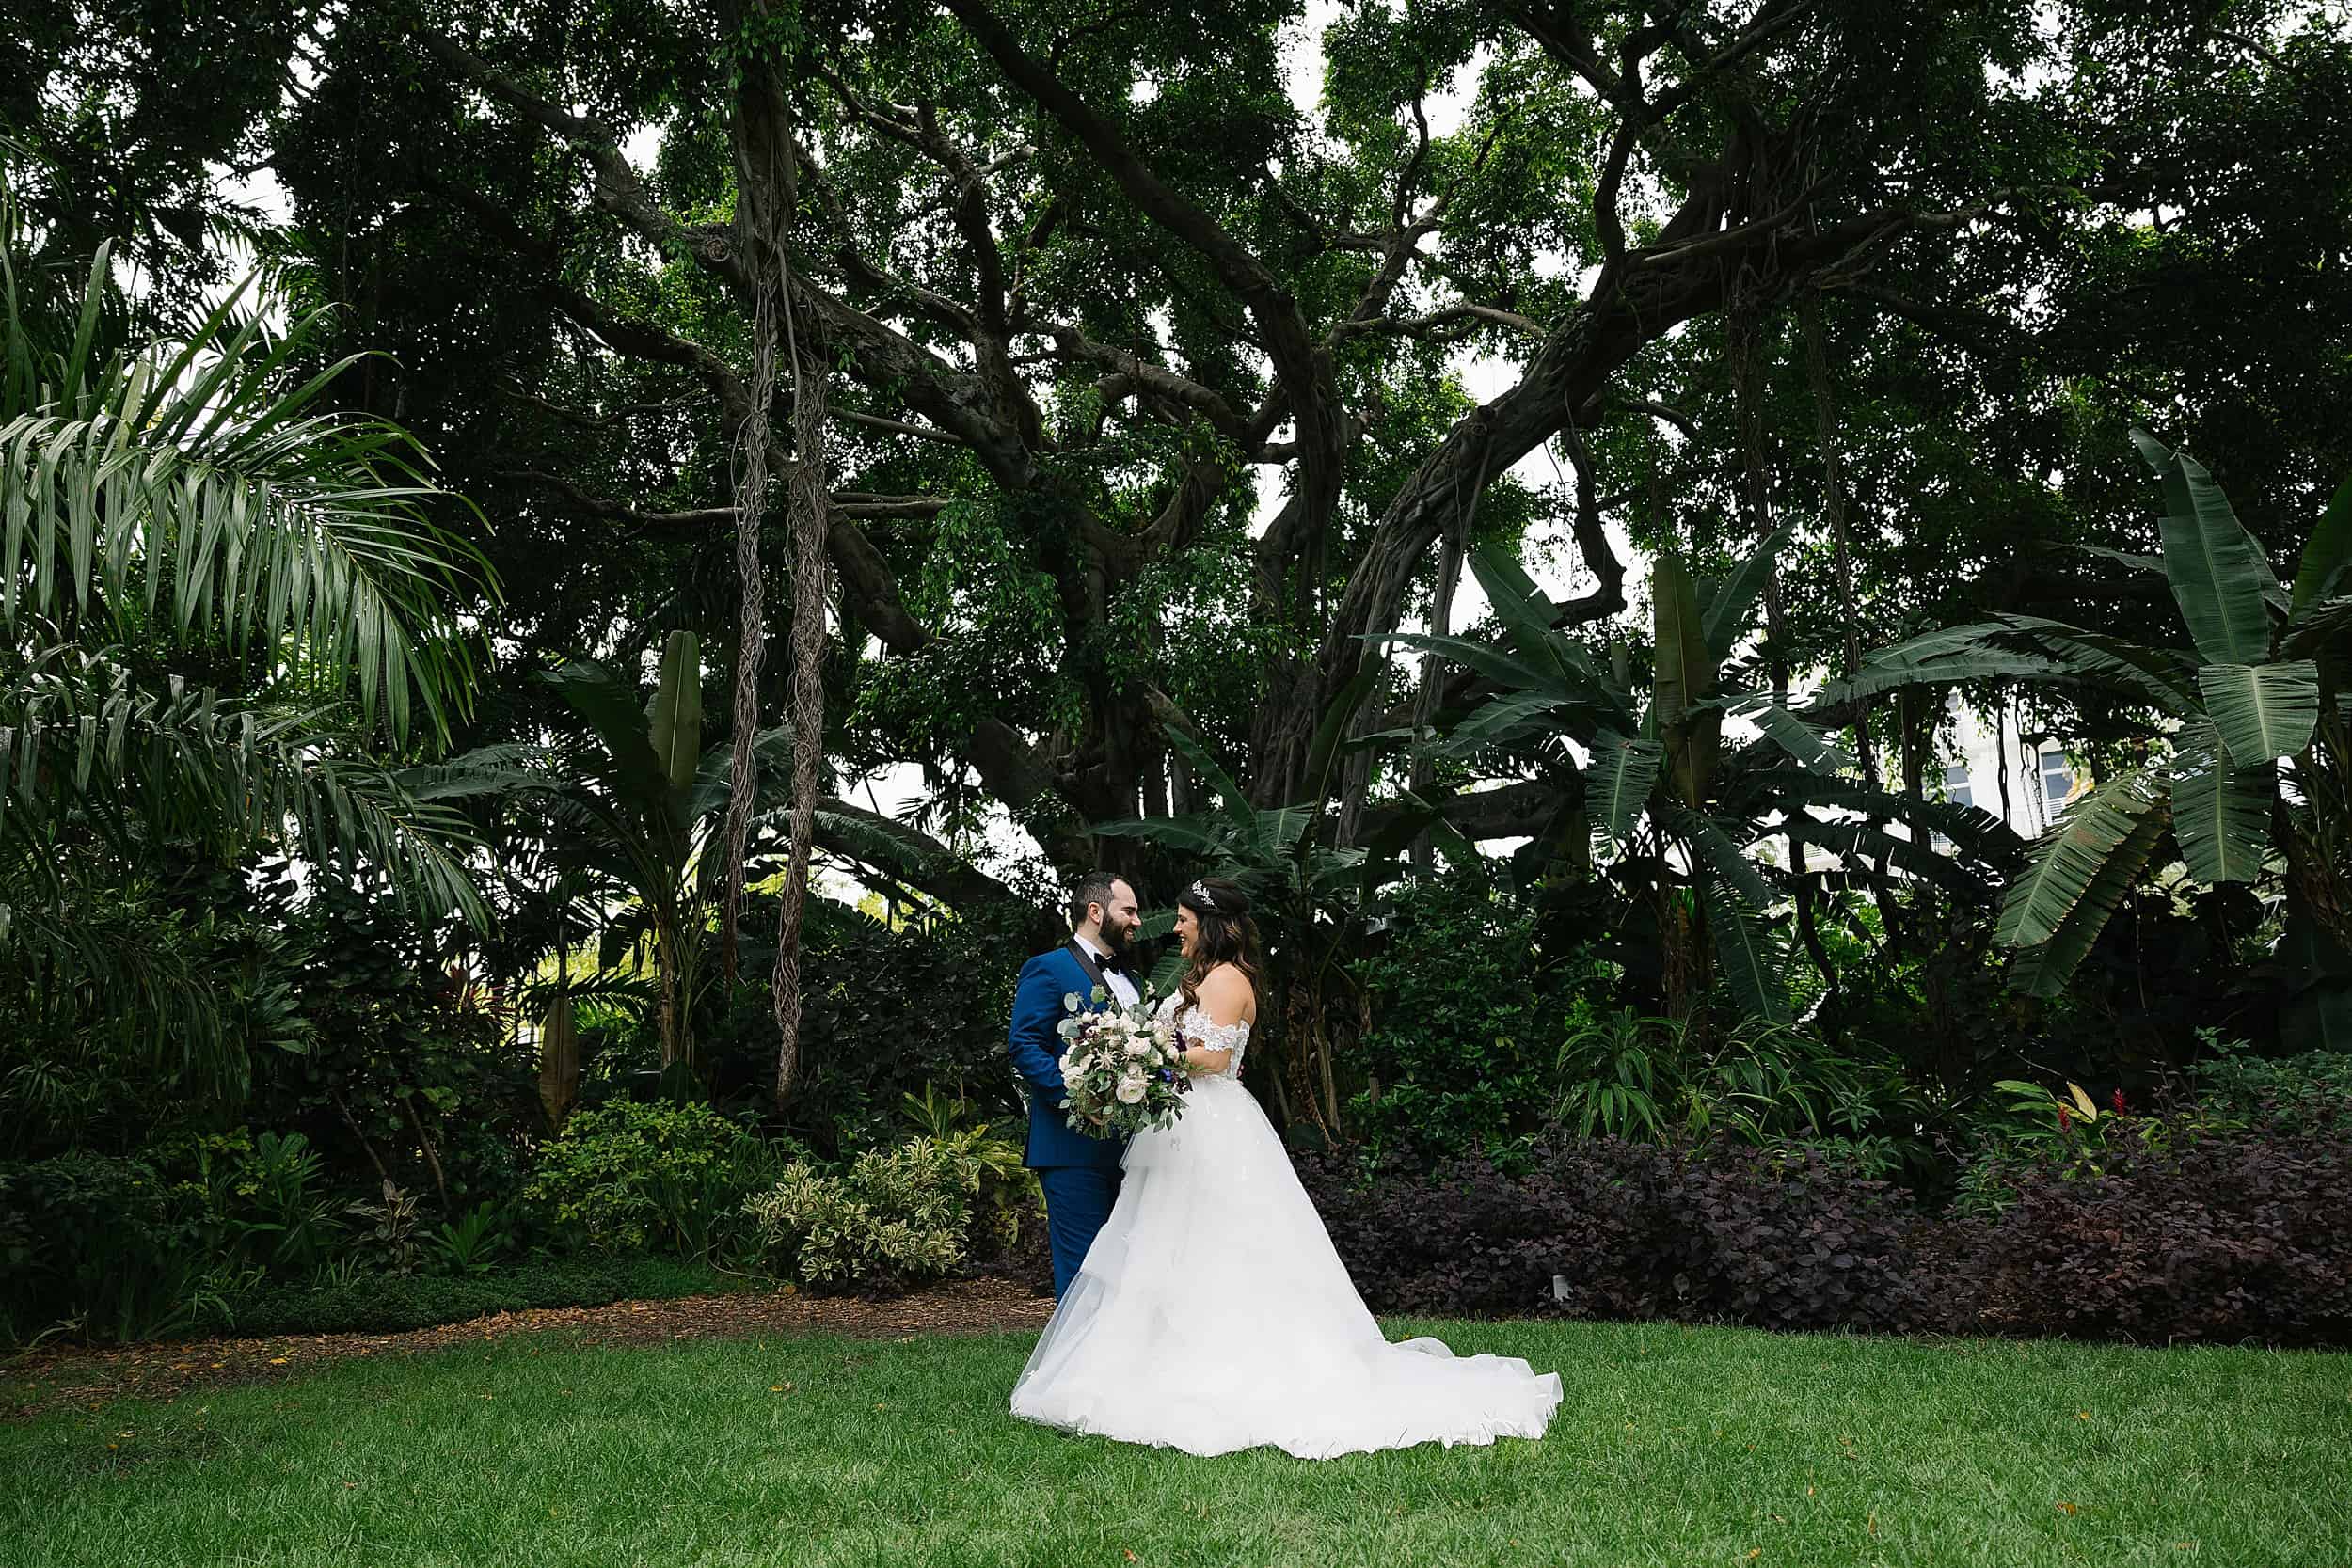 Bride and groom first look at the Miami Beach Botanical Garden